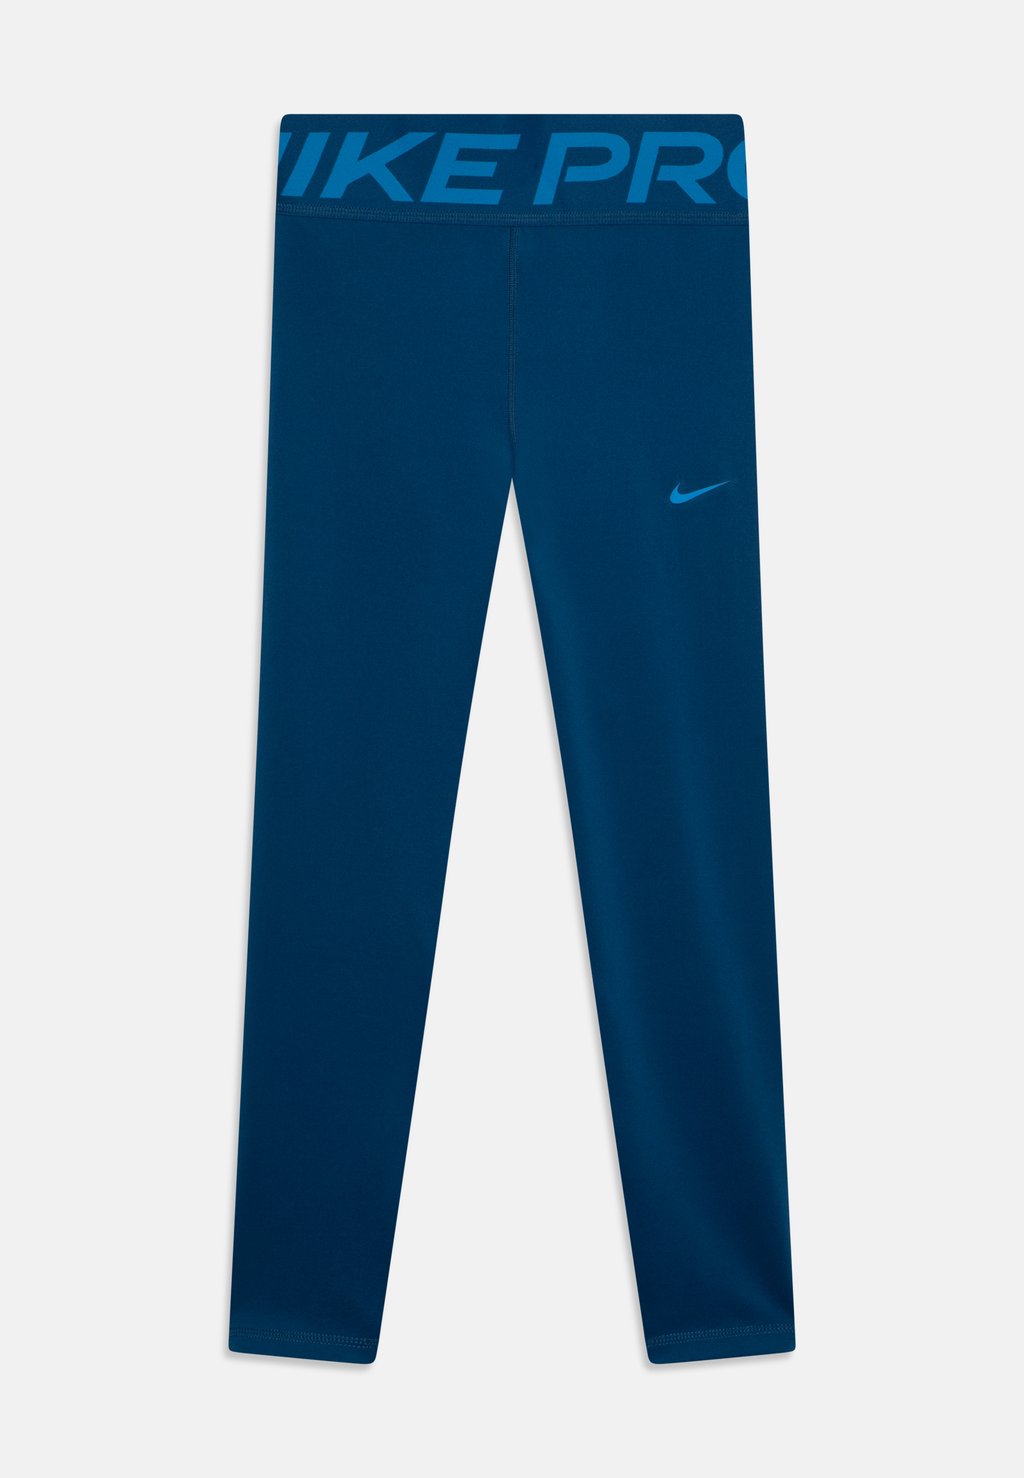 Тайтсы Df Unisex Nike, цвет court blue/light photo blue laeacco old town basket court playground park sport match party blue sky scenic photo background photographic backdrop photocall